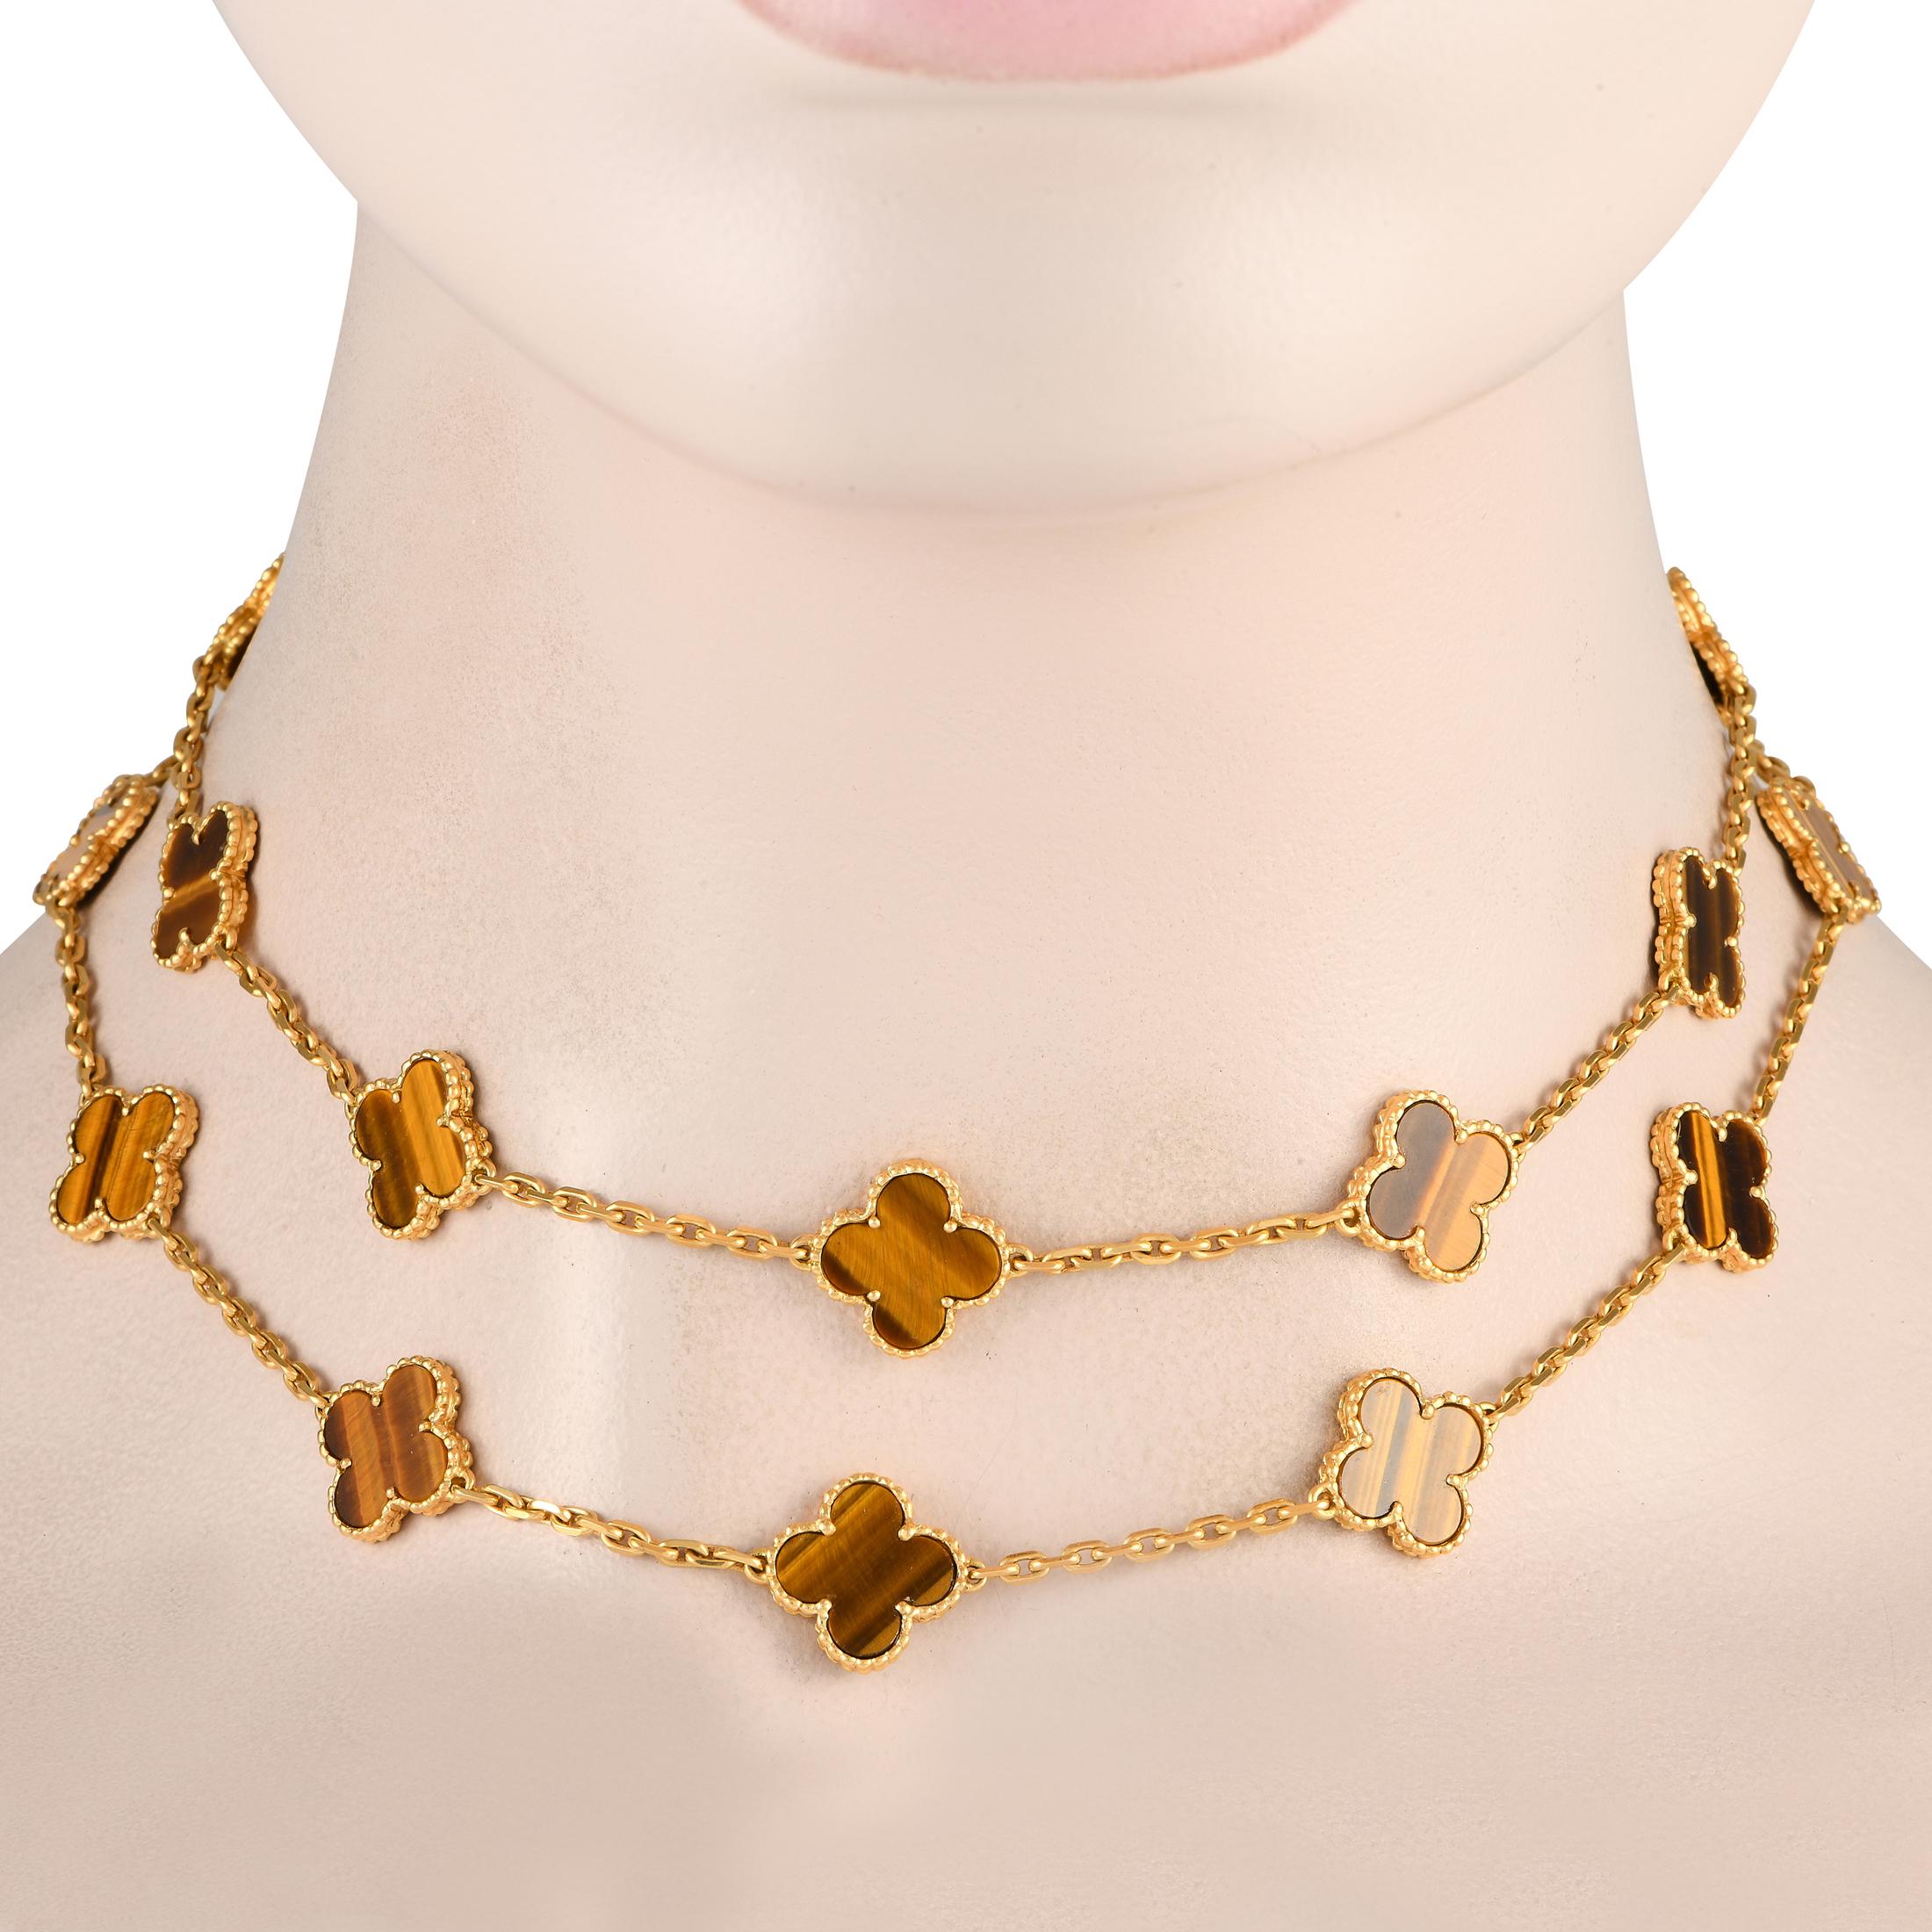 This Van Cleef & Arpels Vintage Alhambra necklace is perfect for the discerning fashionista with a fierce personality. This relentless elegant necklace is made from 18K yellow gold and features 20 Alhambra motifs, each with Tiger Eye inlay. The